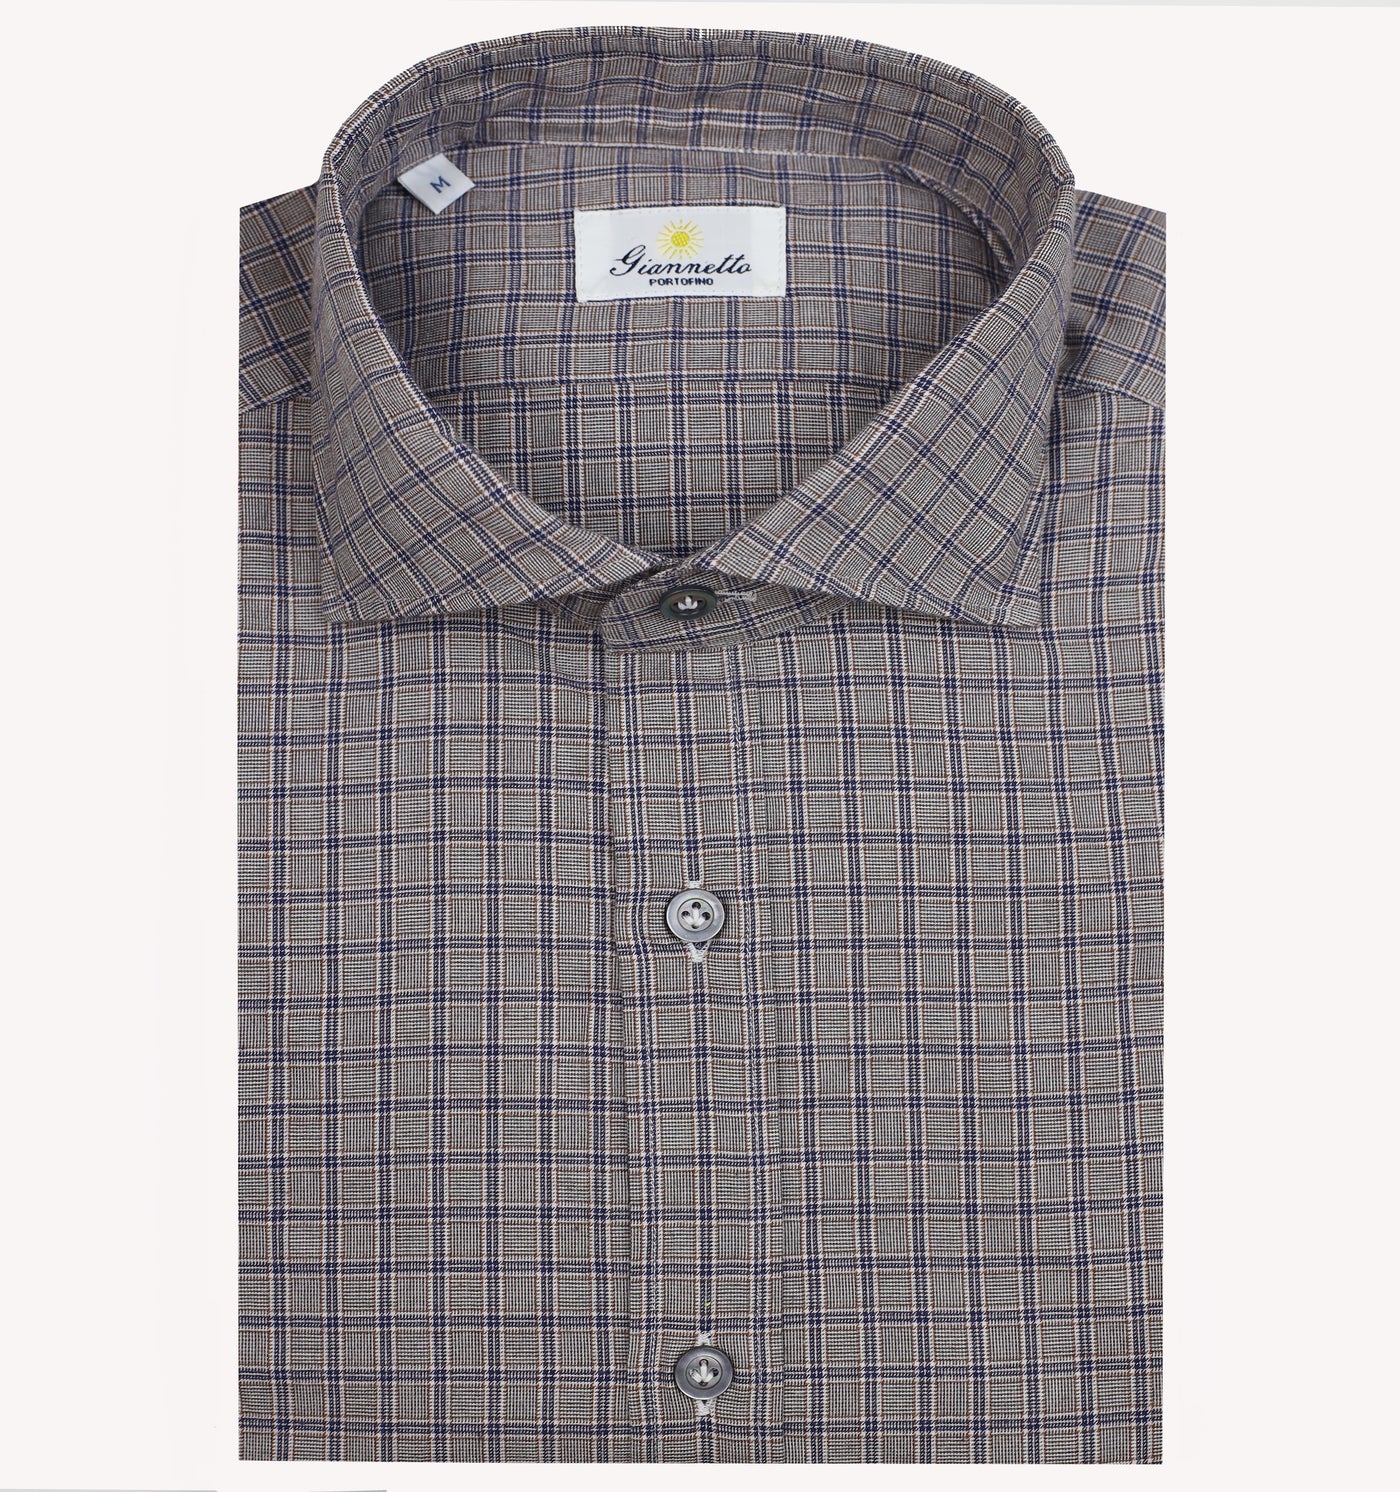 Giannetto Check Sport Shirt in Grey Navy